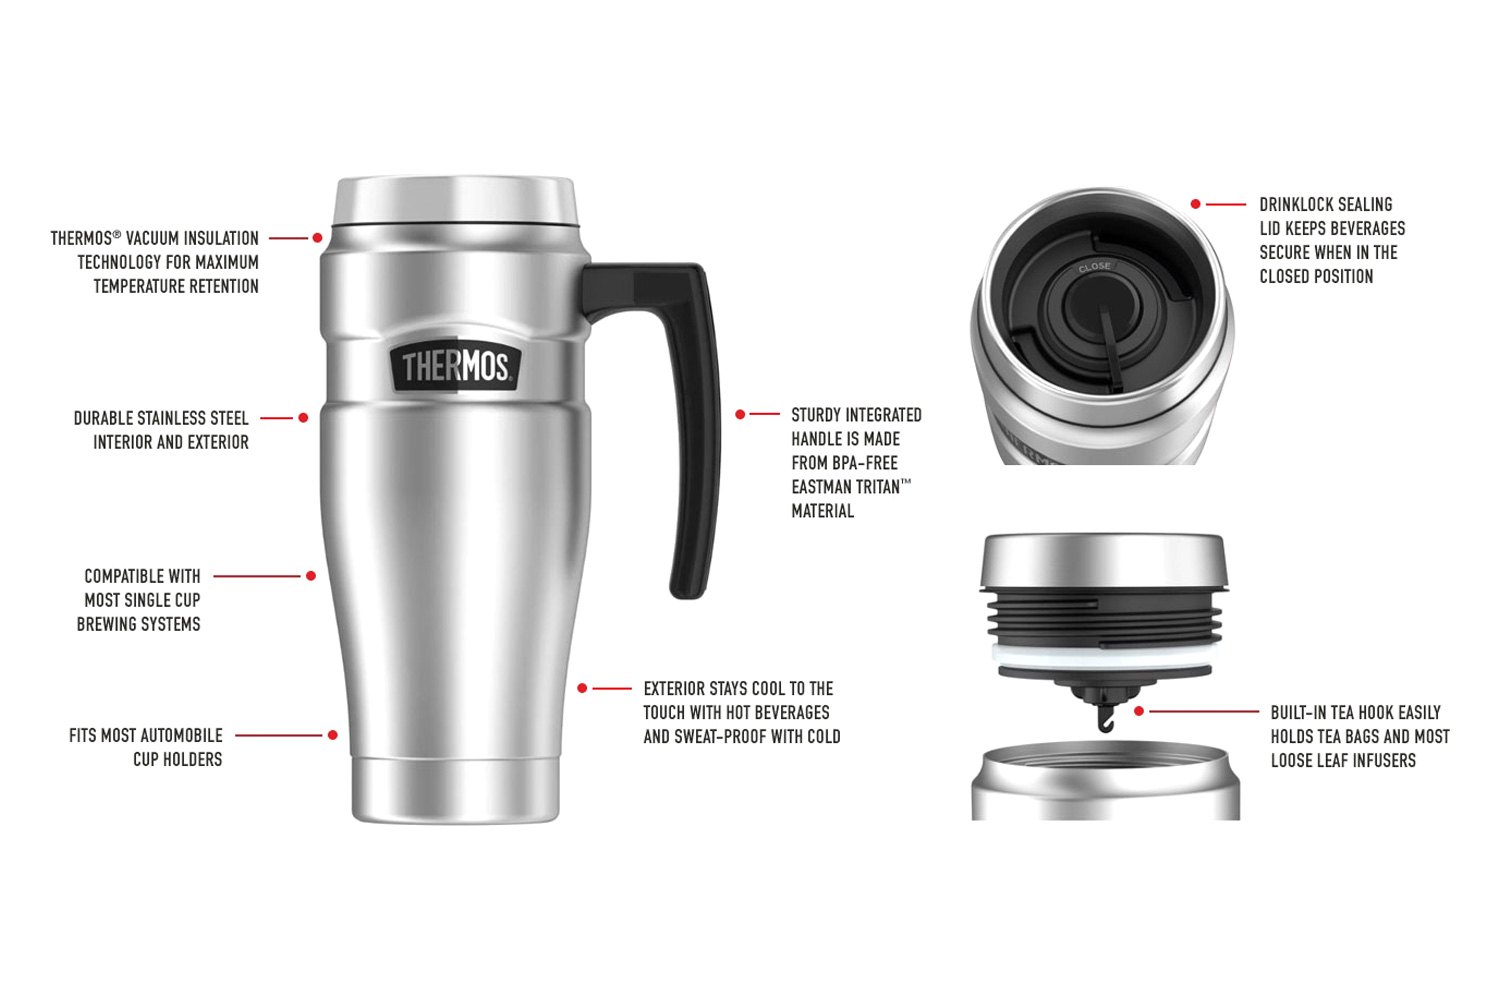 16 oz. Thermos Stainless King Stainless Steel Travel Mug